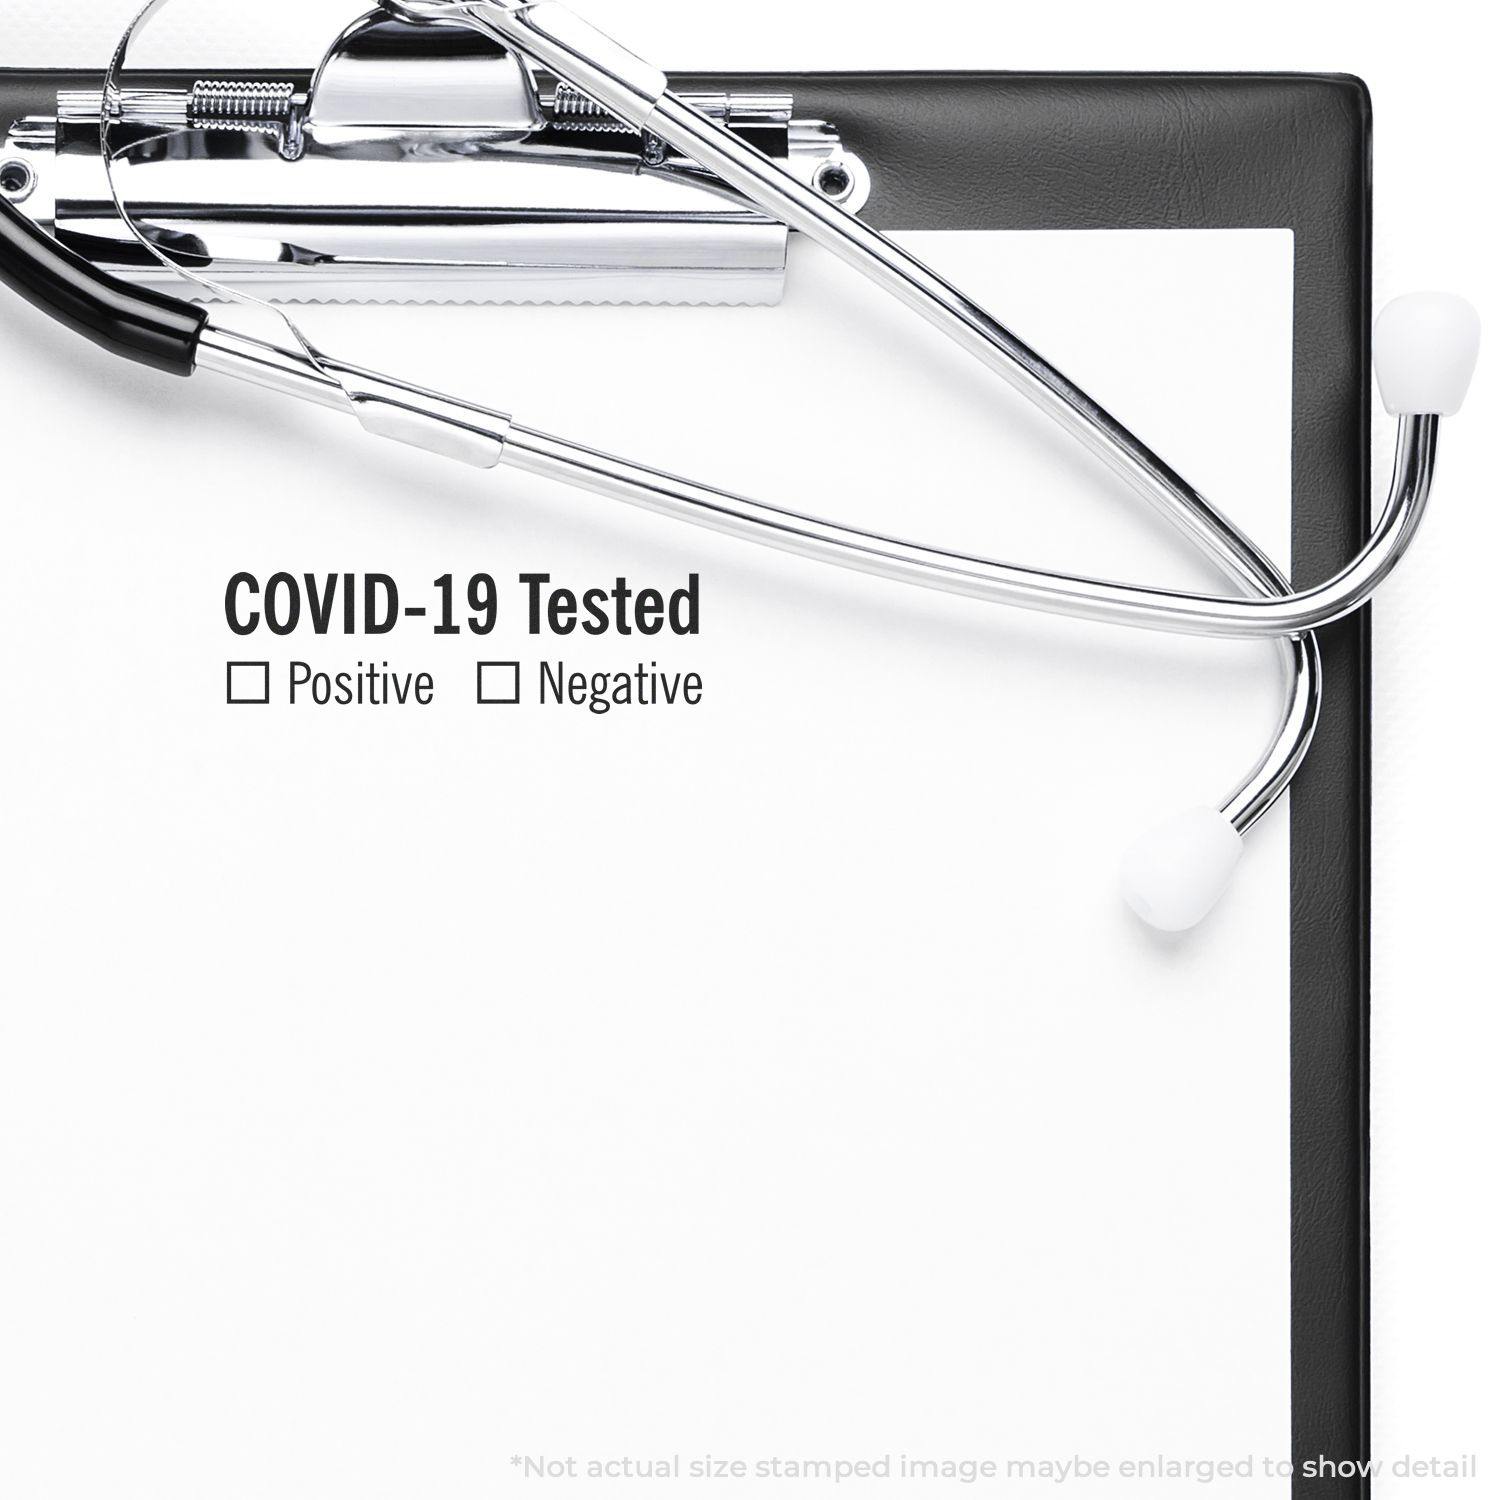 A self-inking stamp with a stamped image showing how the text "COVID-19 Tested" with the words "Positive" and "Negative" underneath with checkboxes (where a box can be checked based on whether a person is positive or negative for the virus) is displayed after stamping.